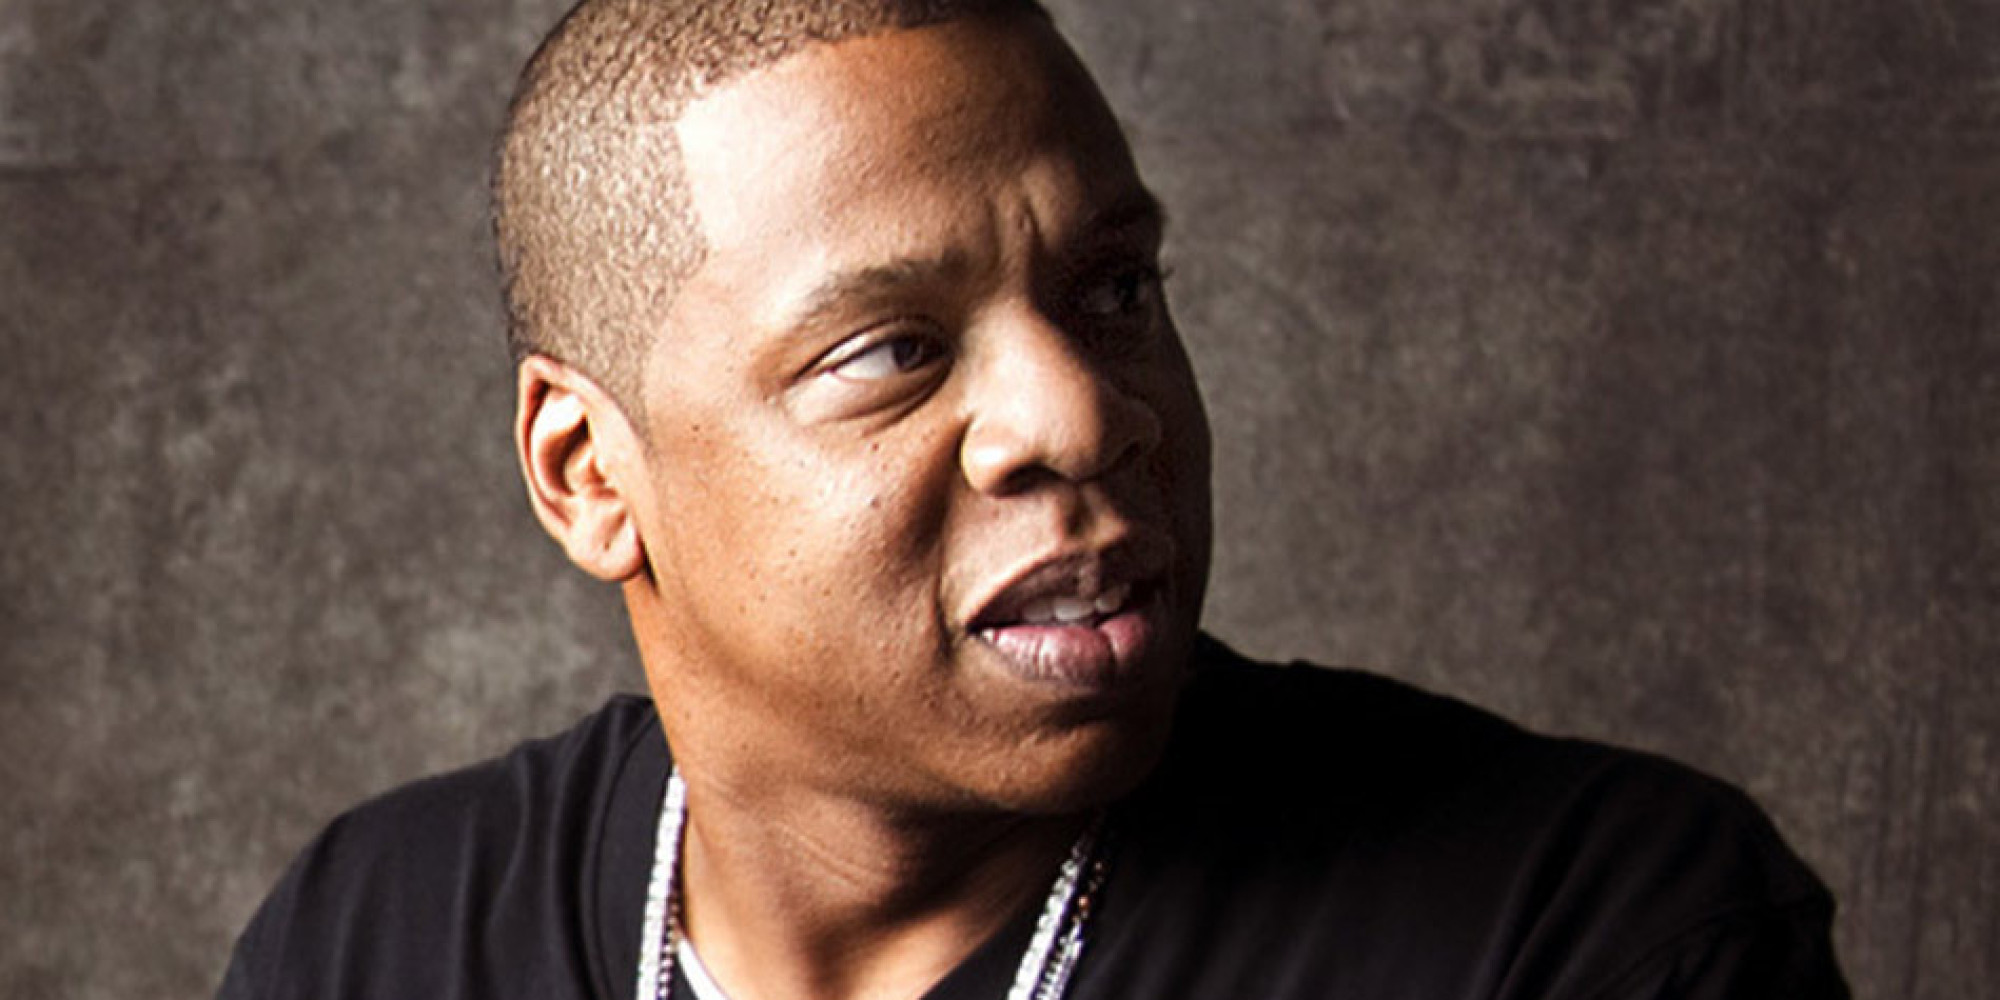 UPDATE: Jay-Z pulls all his music from Spotify, reinstates on Apple Music